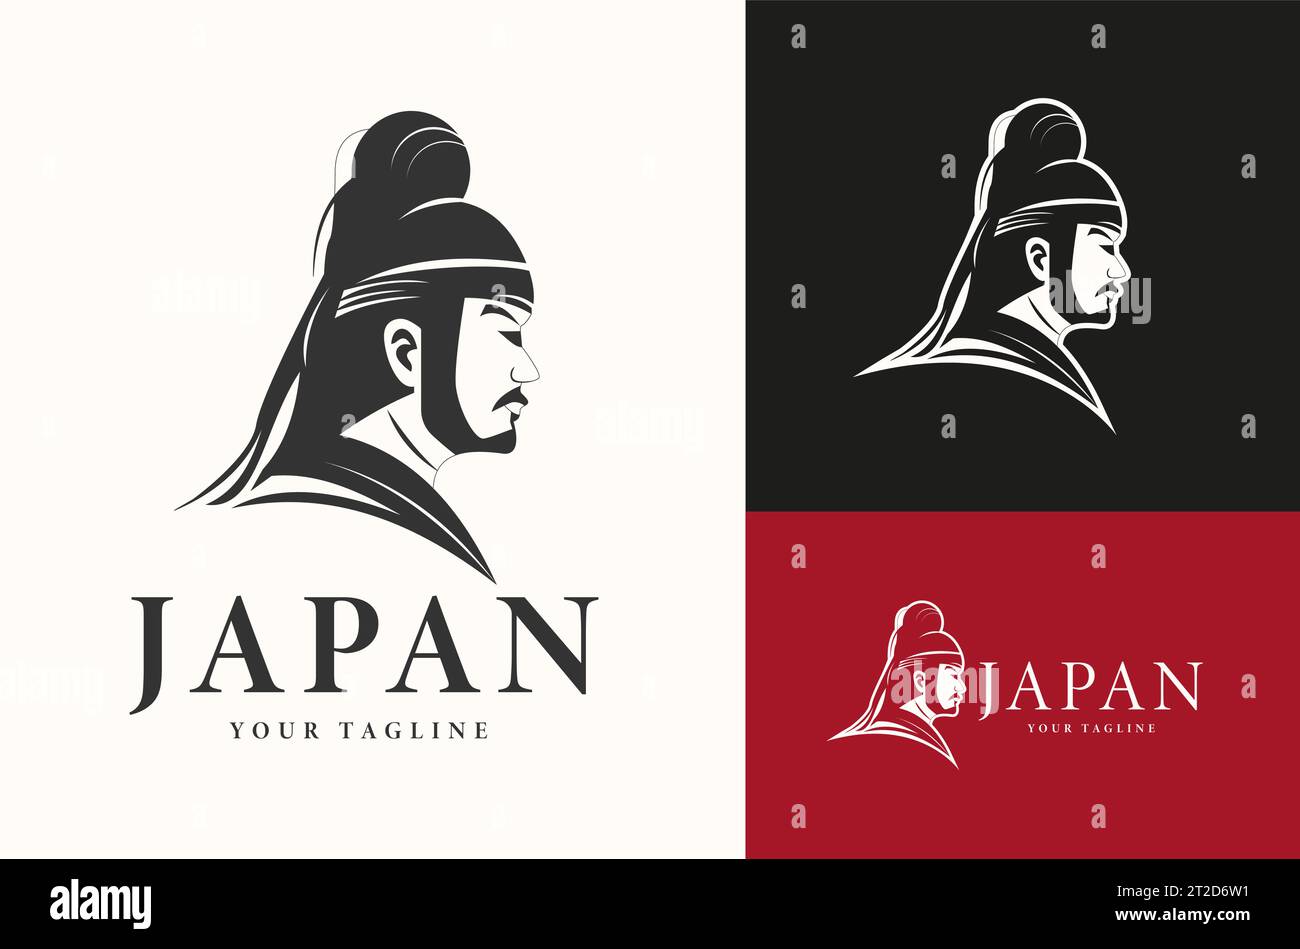 Illustration of a Japanese Knight Silhouette facing a Japanese Warrior Logo design Stock Vector